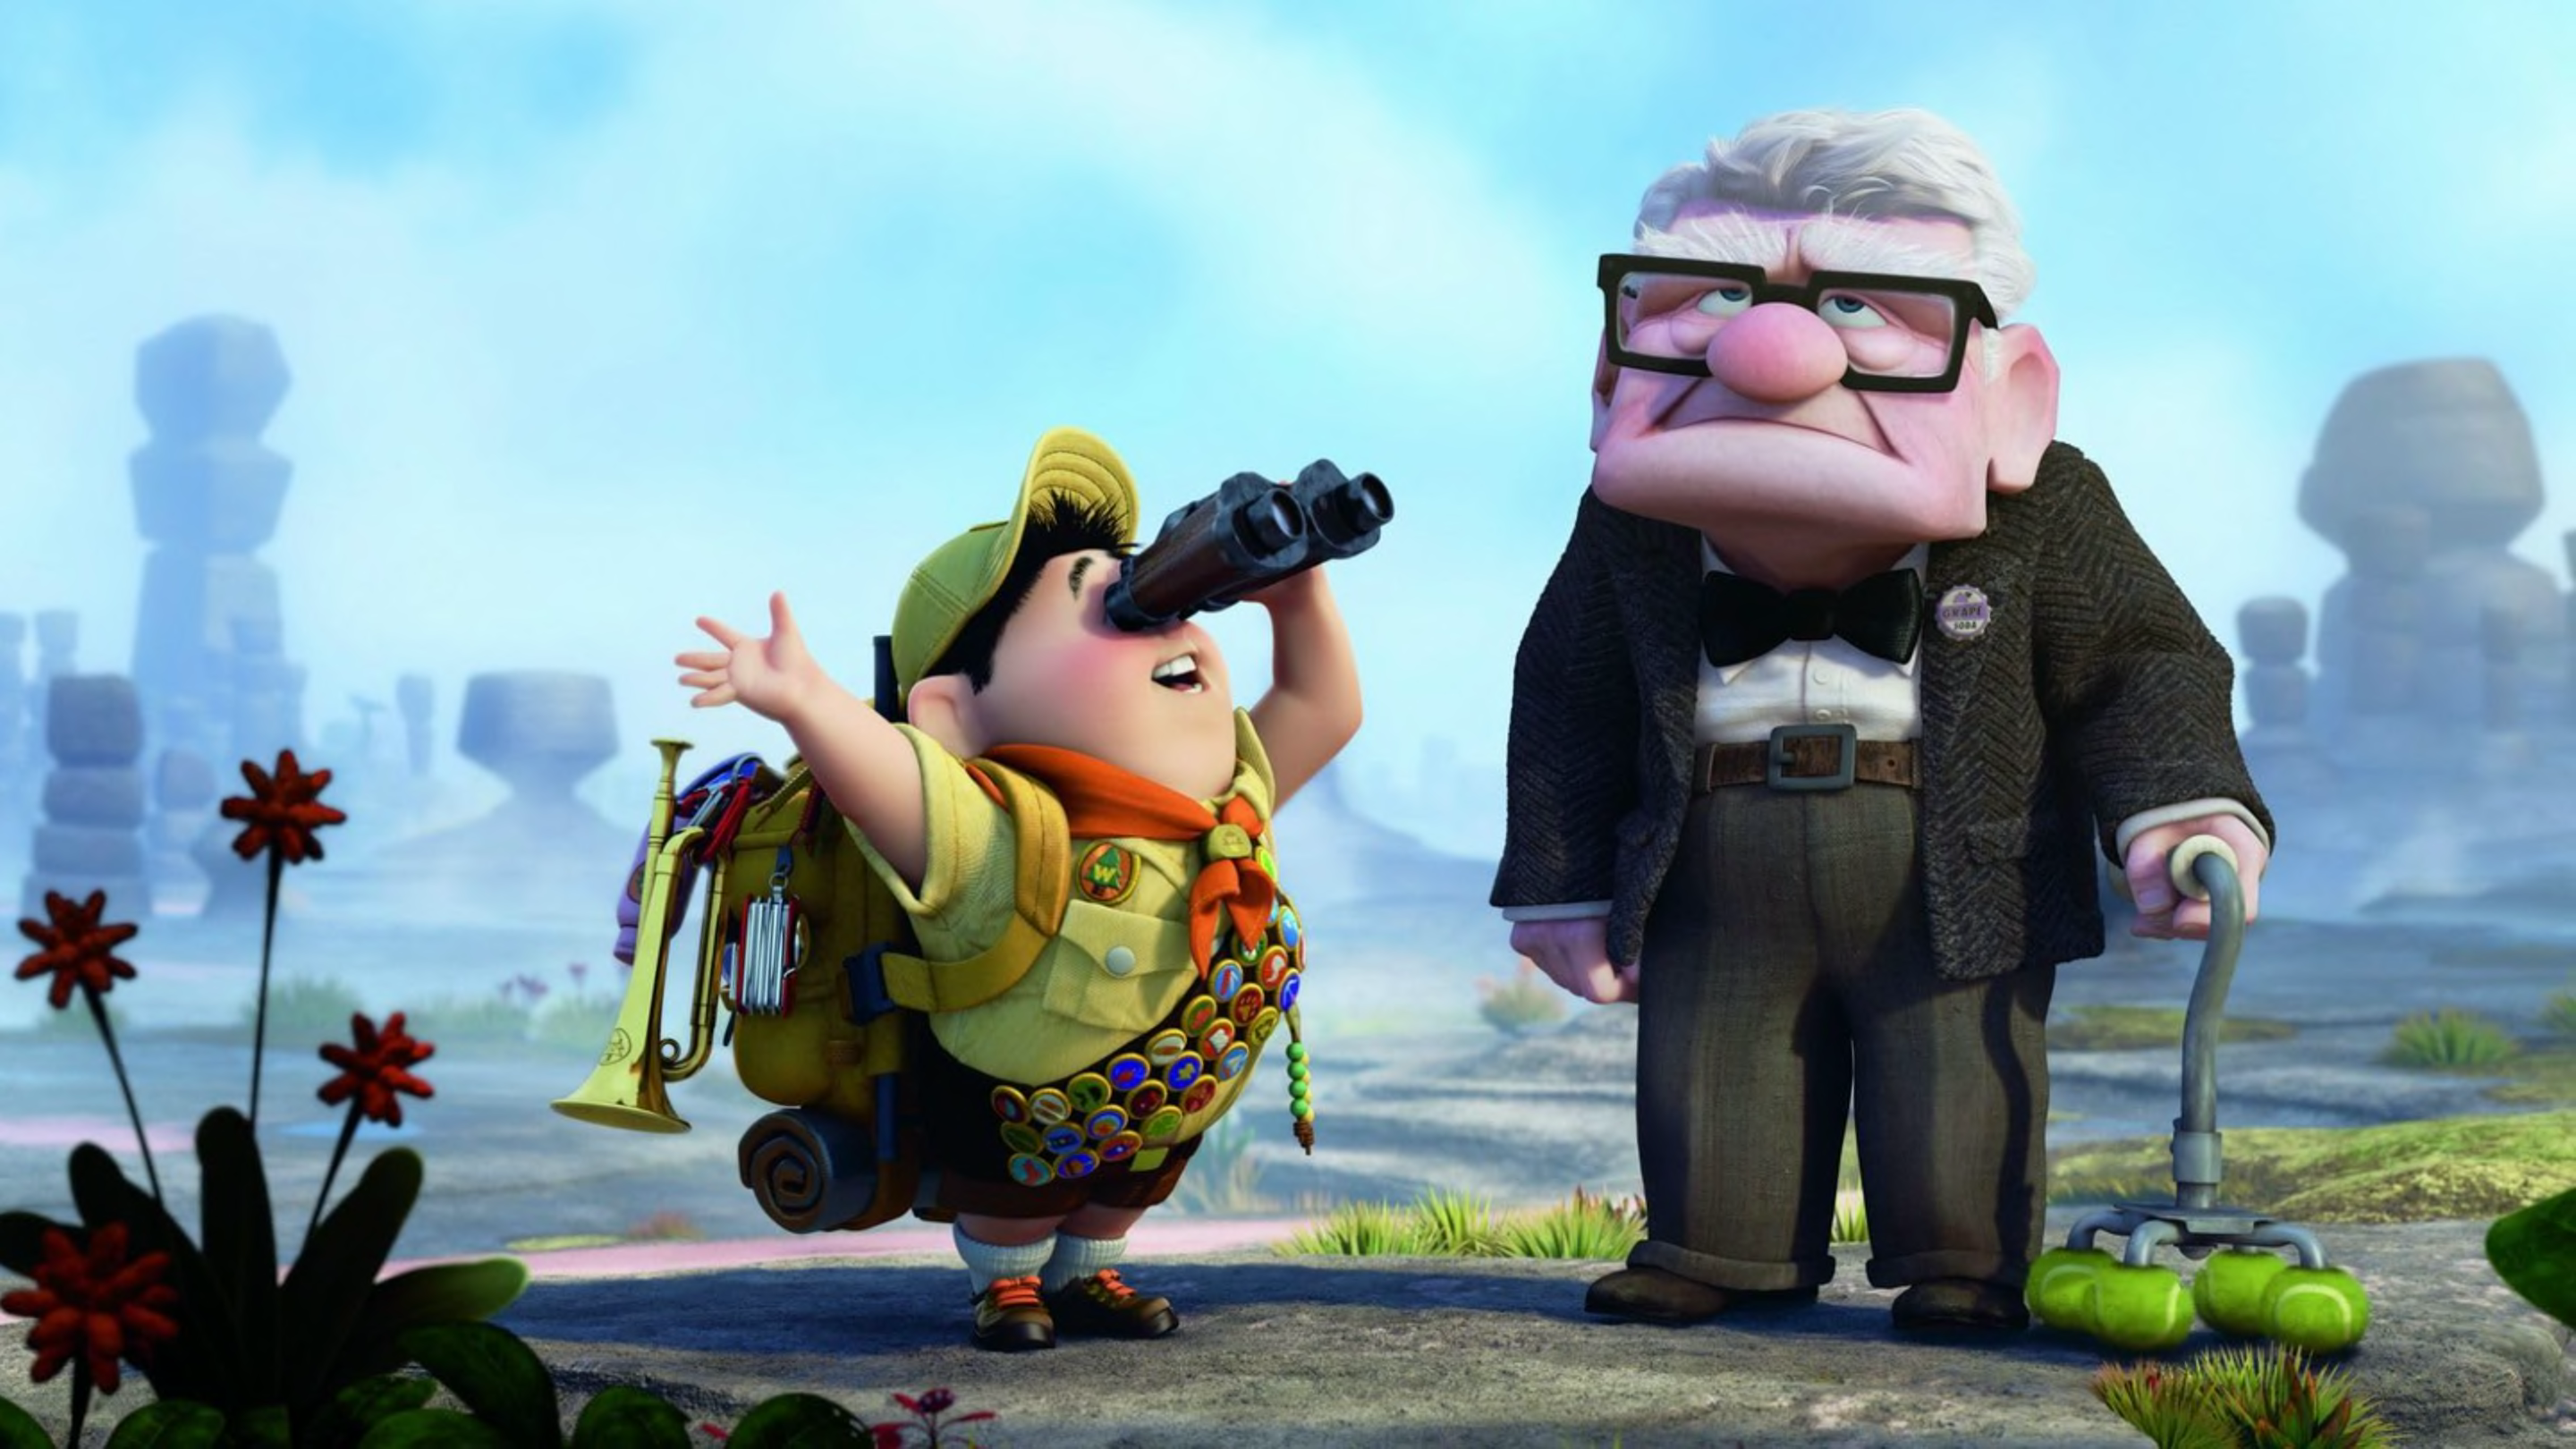 Who Is Russell’s Dad in ‘Up’? This Fan Theory Might Have Figured It Out